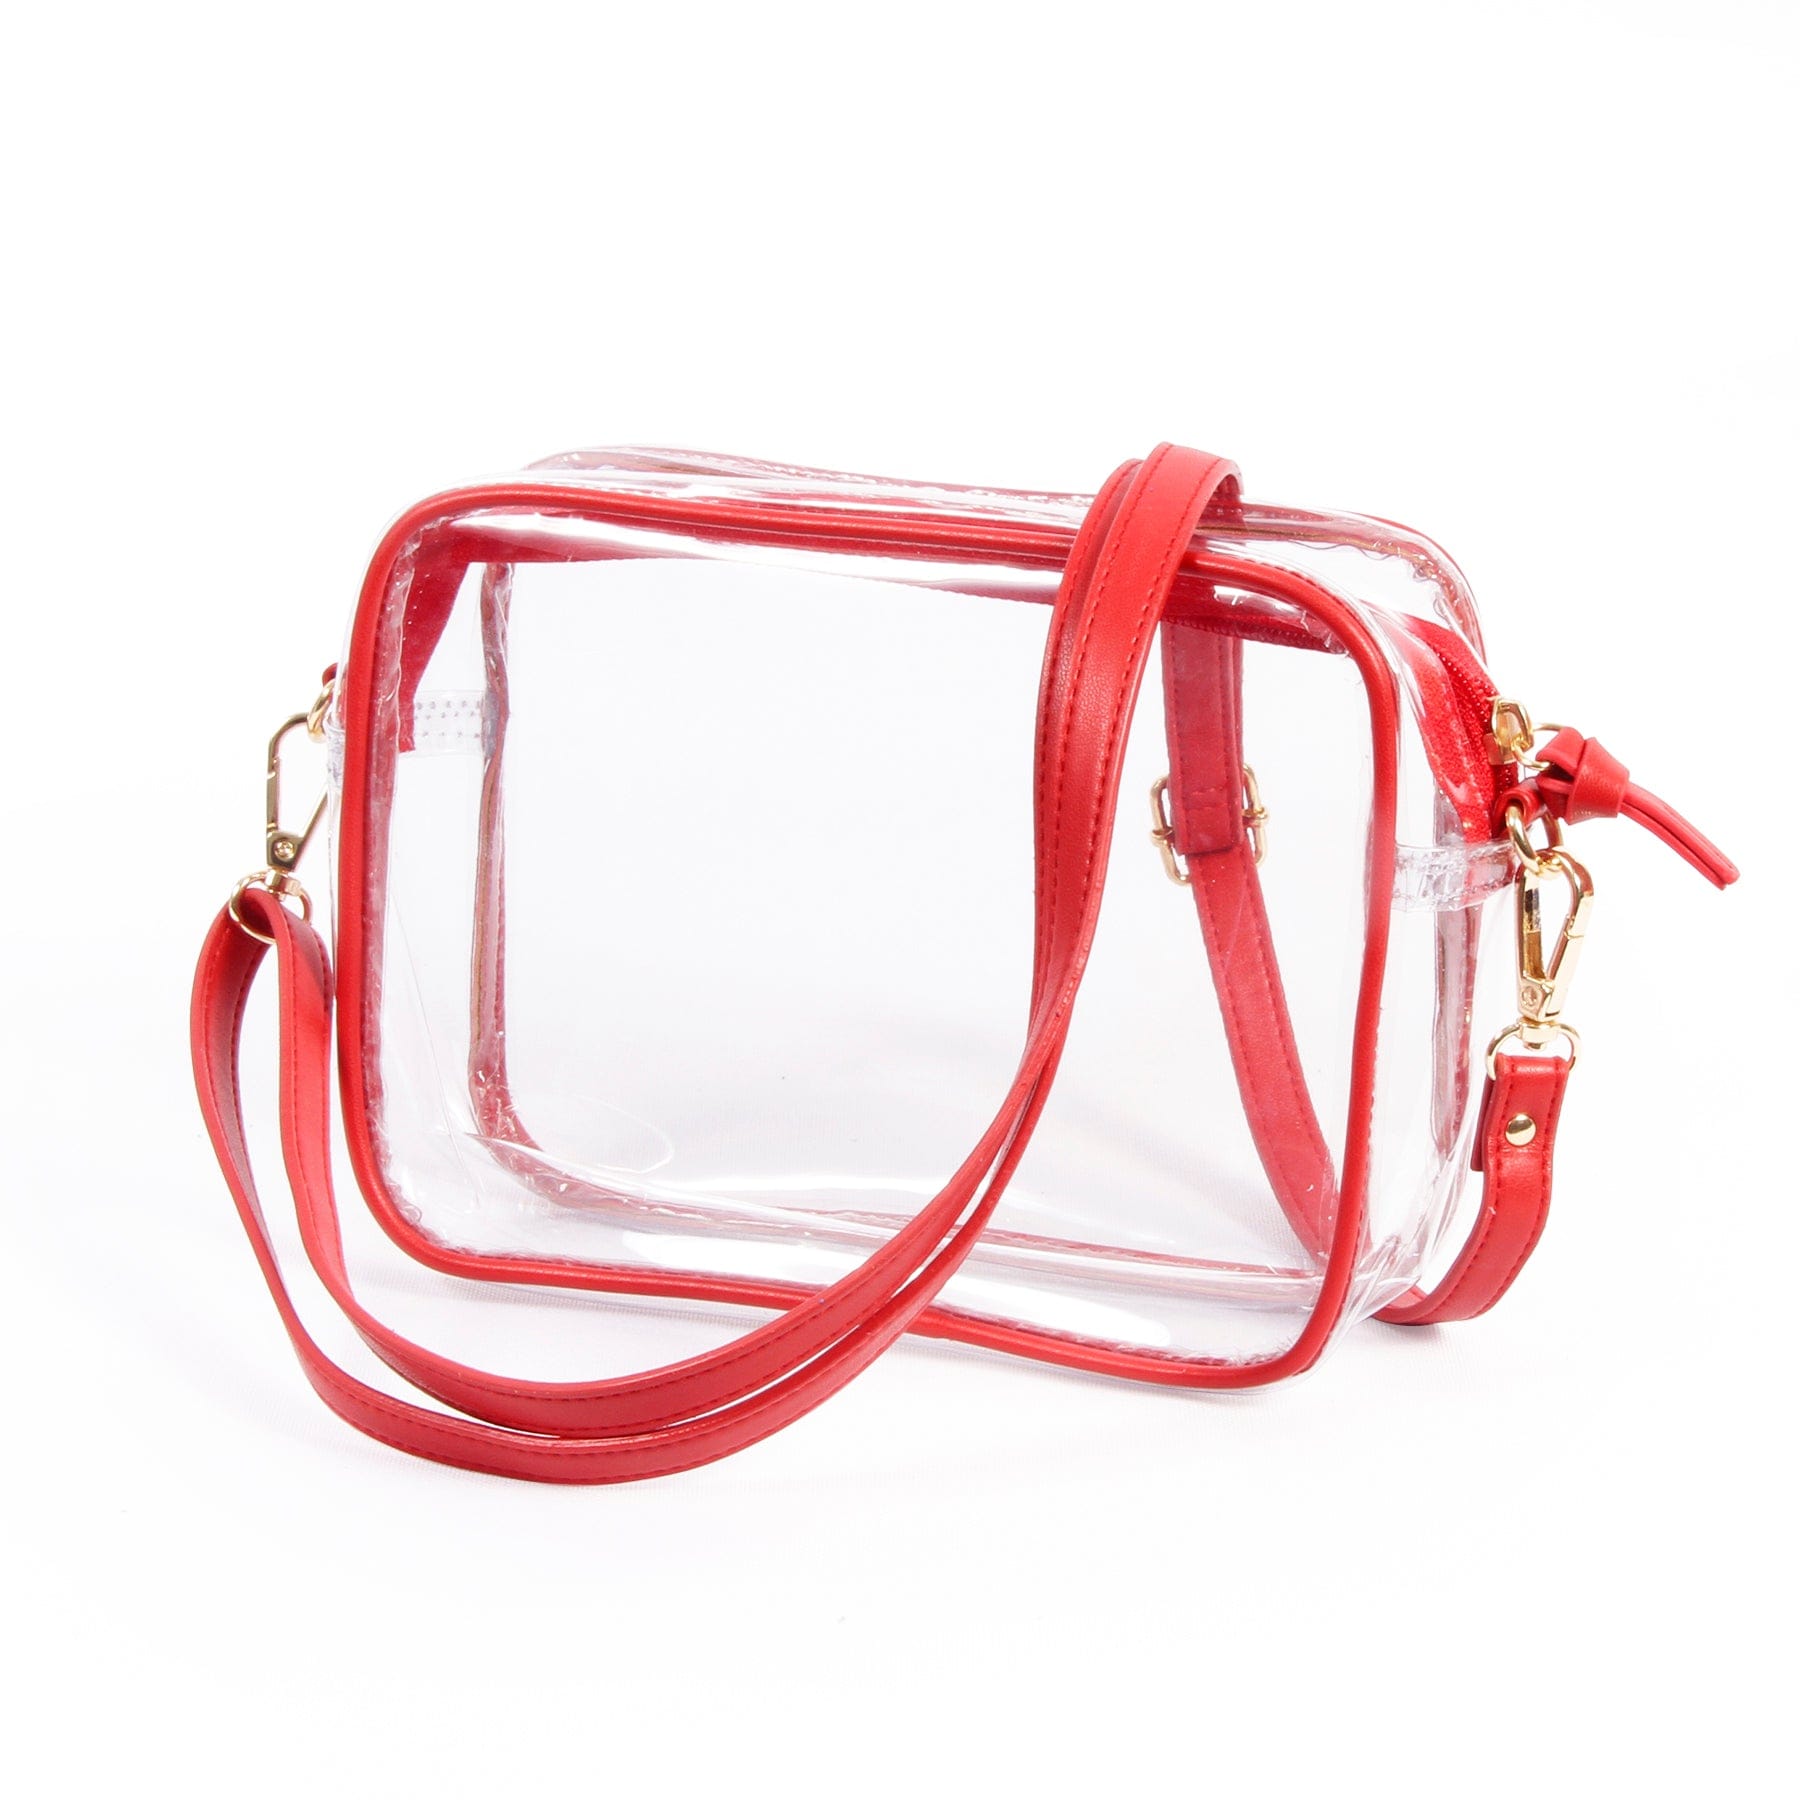 Clear Purse with Patterned Straps - Texas